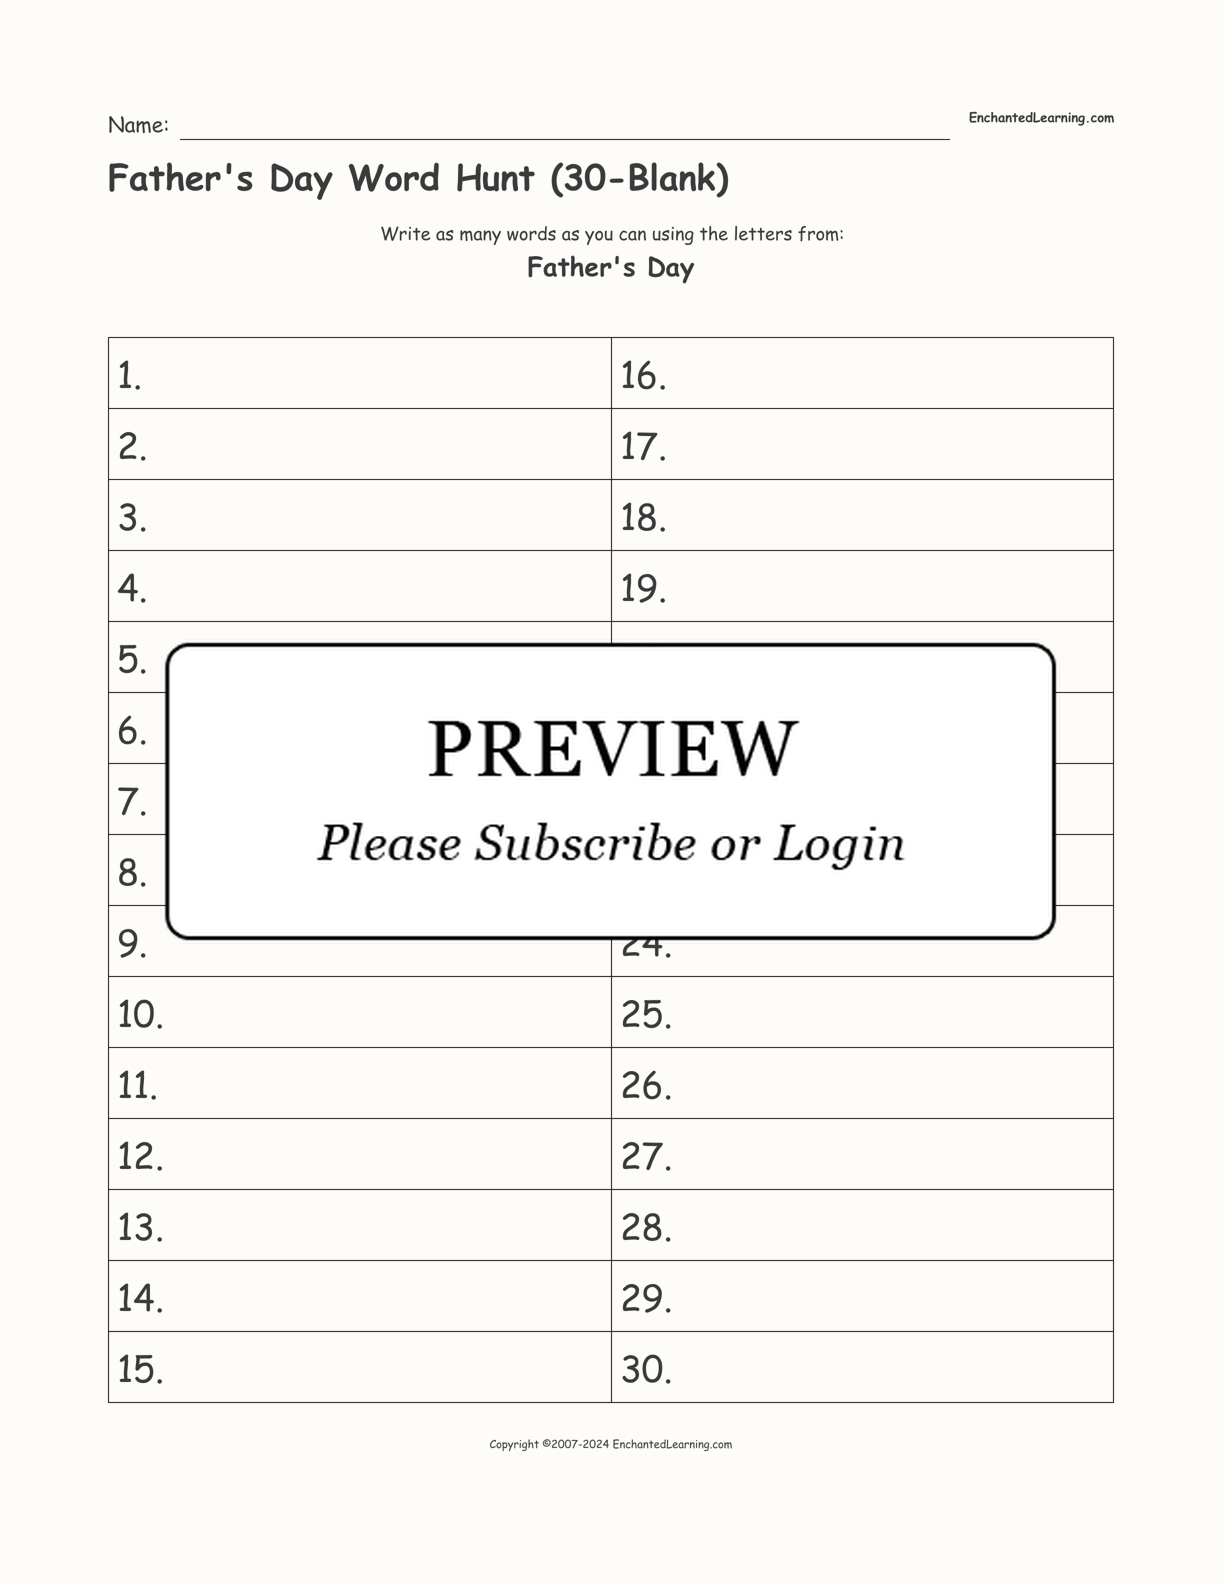 Father's Day Word Hunt (30-Blank) interactive worksheet page 1